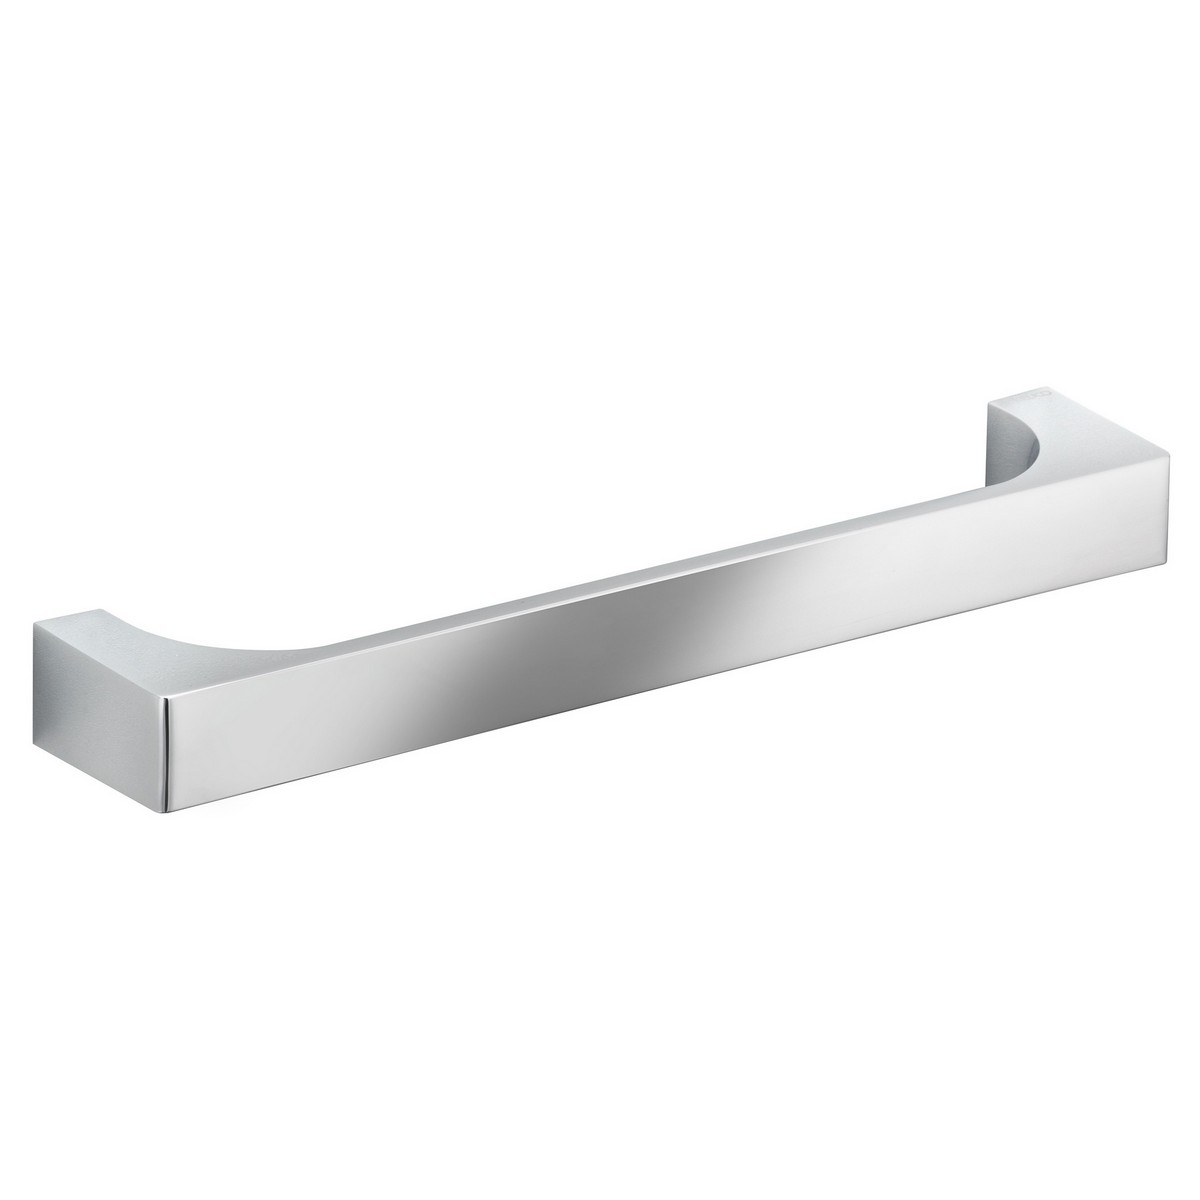 KEUCO 111070000 EDITION 11 12 5/8 INCH WALL MOUNTED SUPPORT RAIL